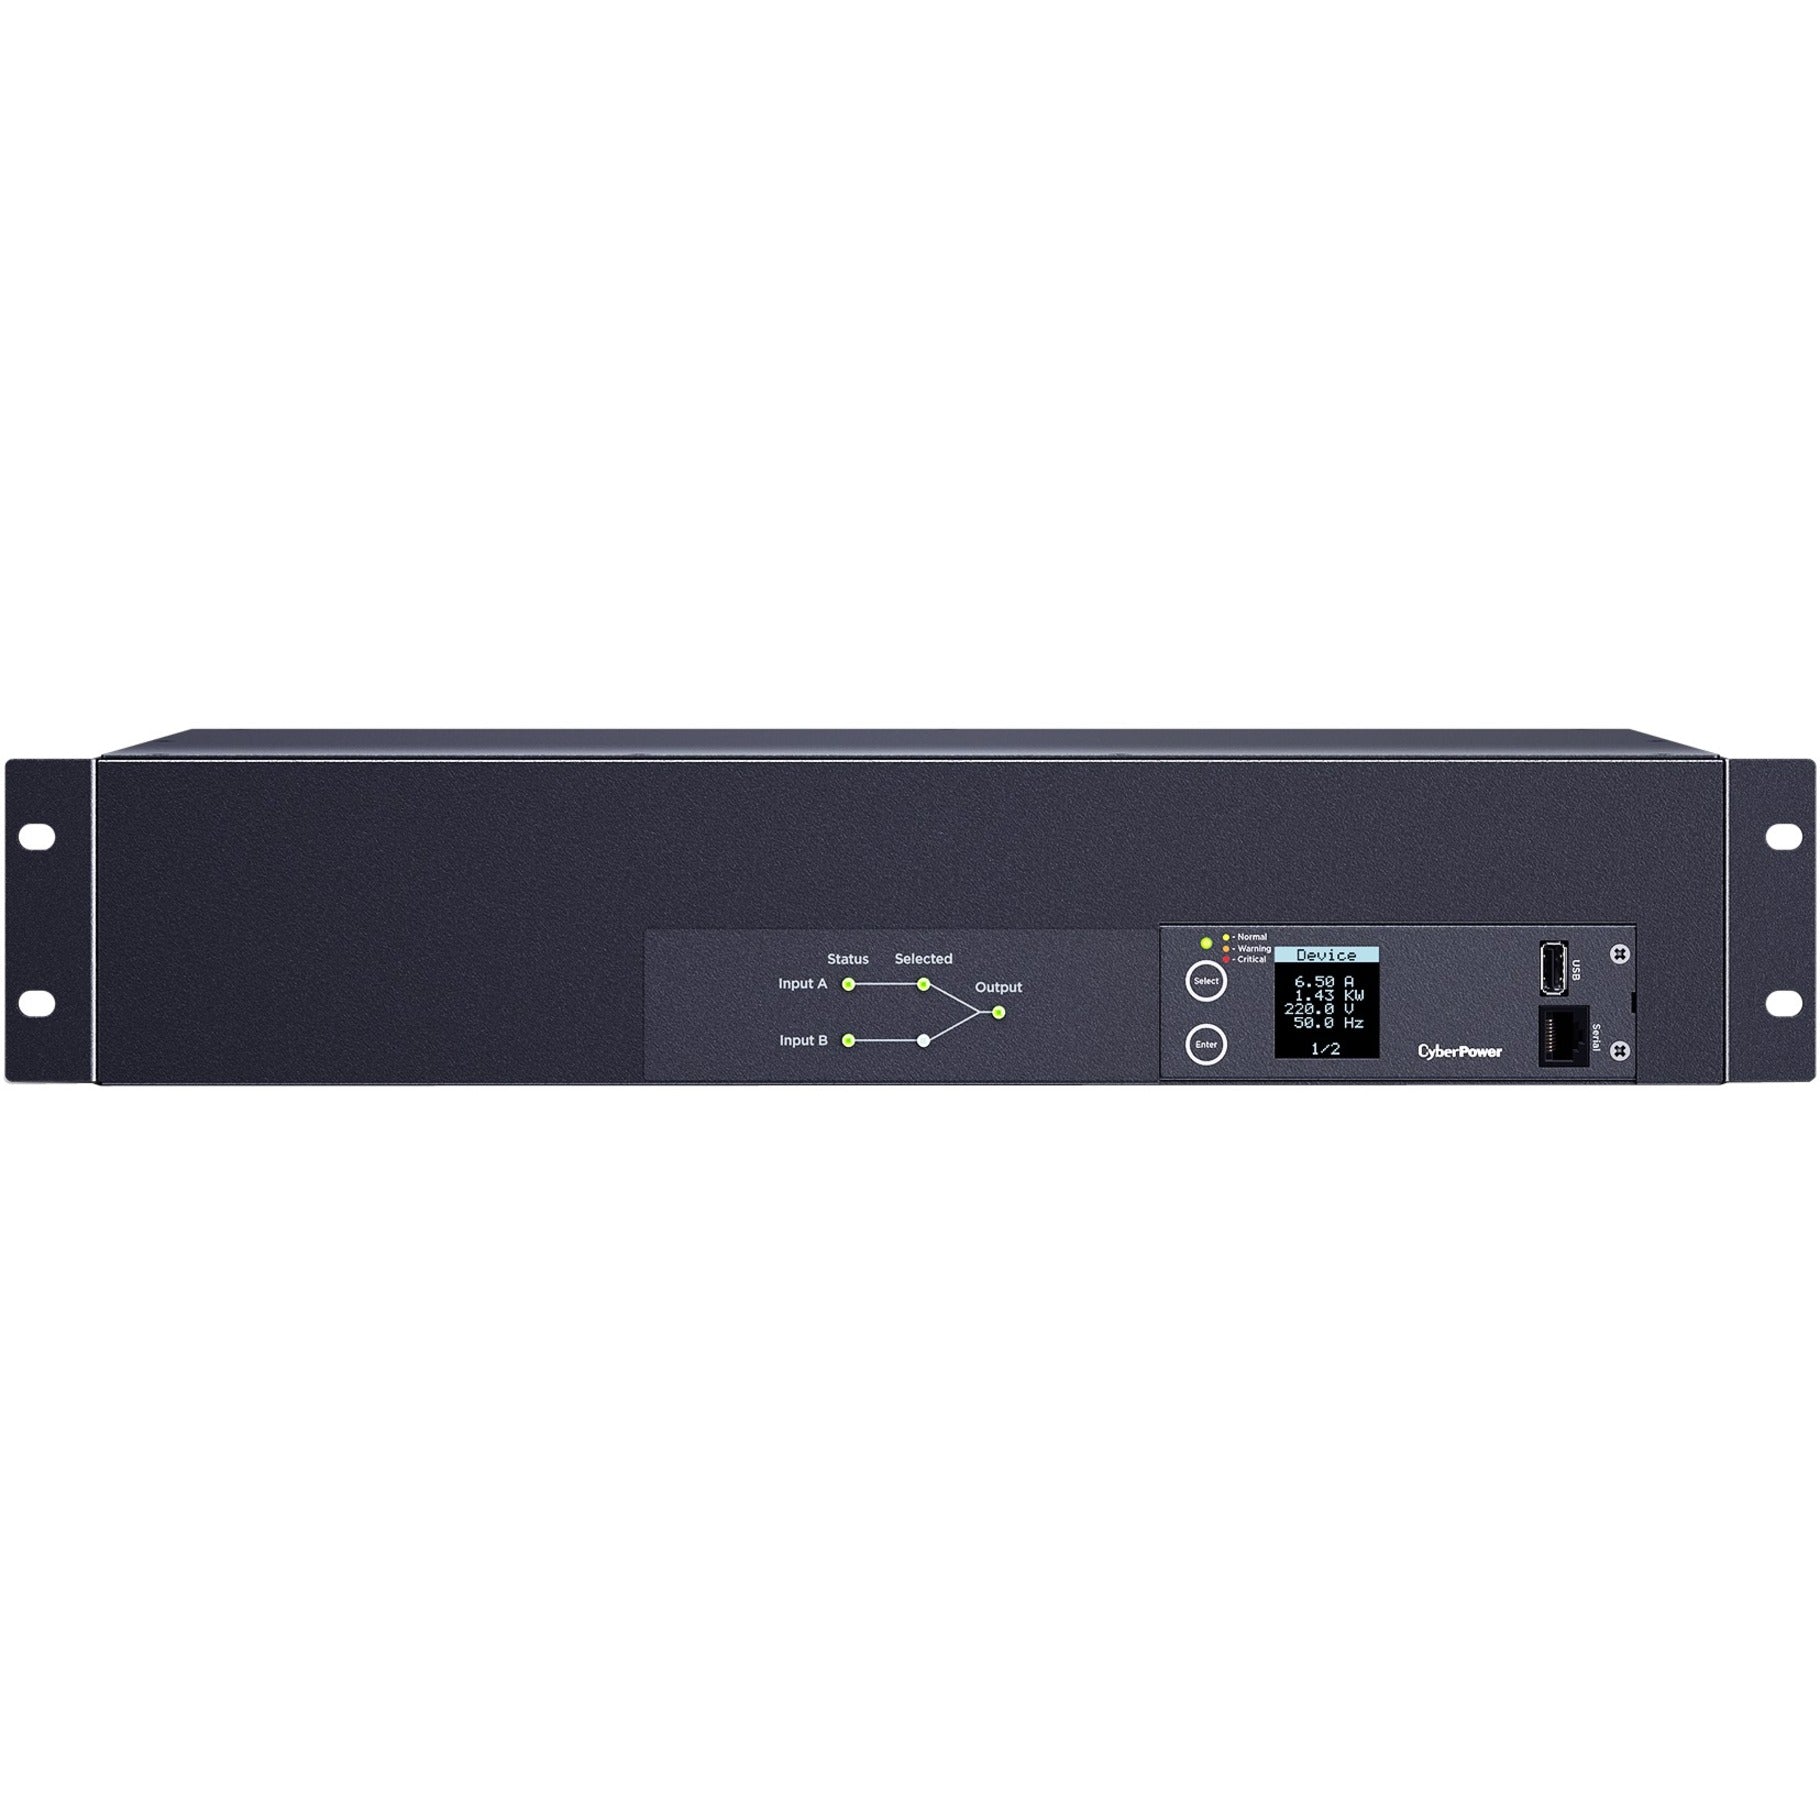 CyberPower PDU24007 Metered ATS PDU 19-Outlets PDU, 30A, 230V AC, Rack-mountable